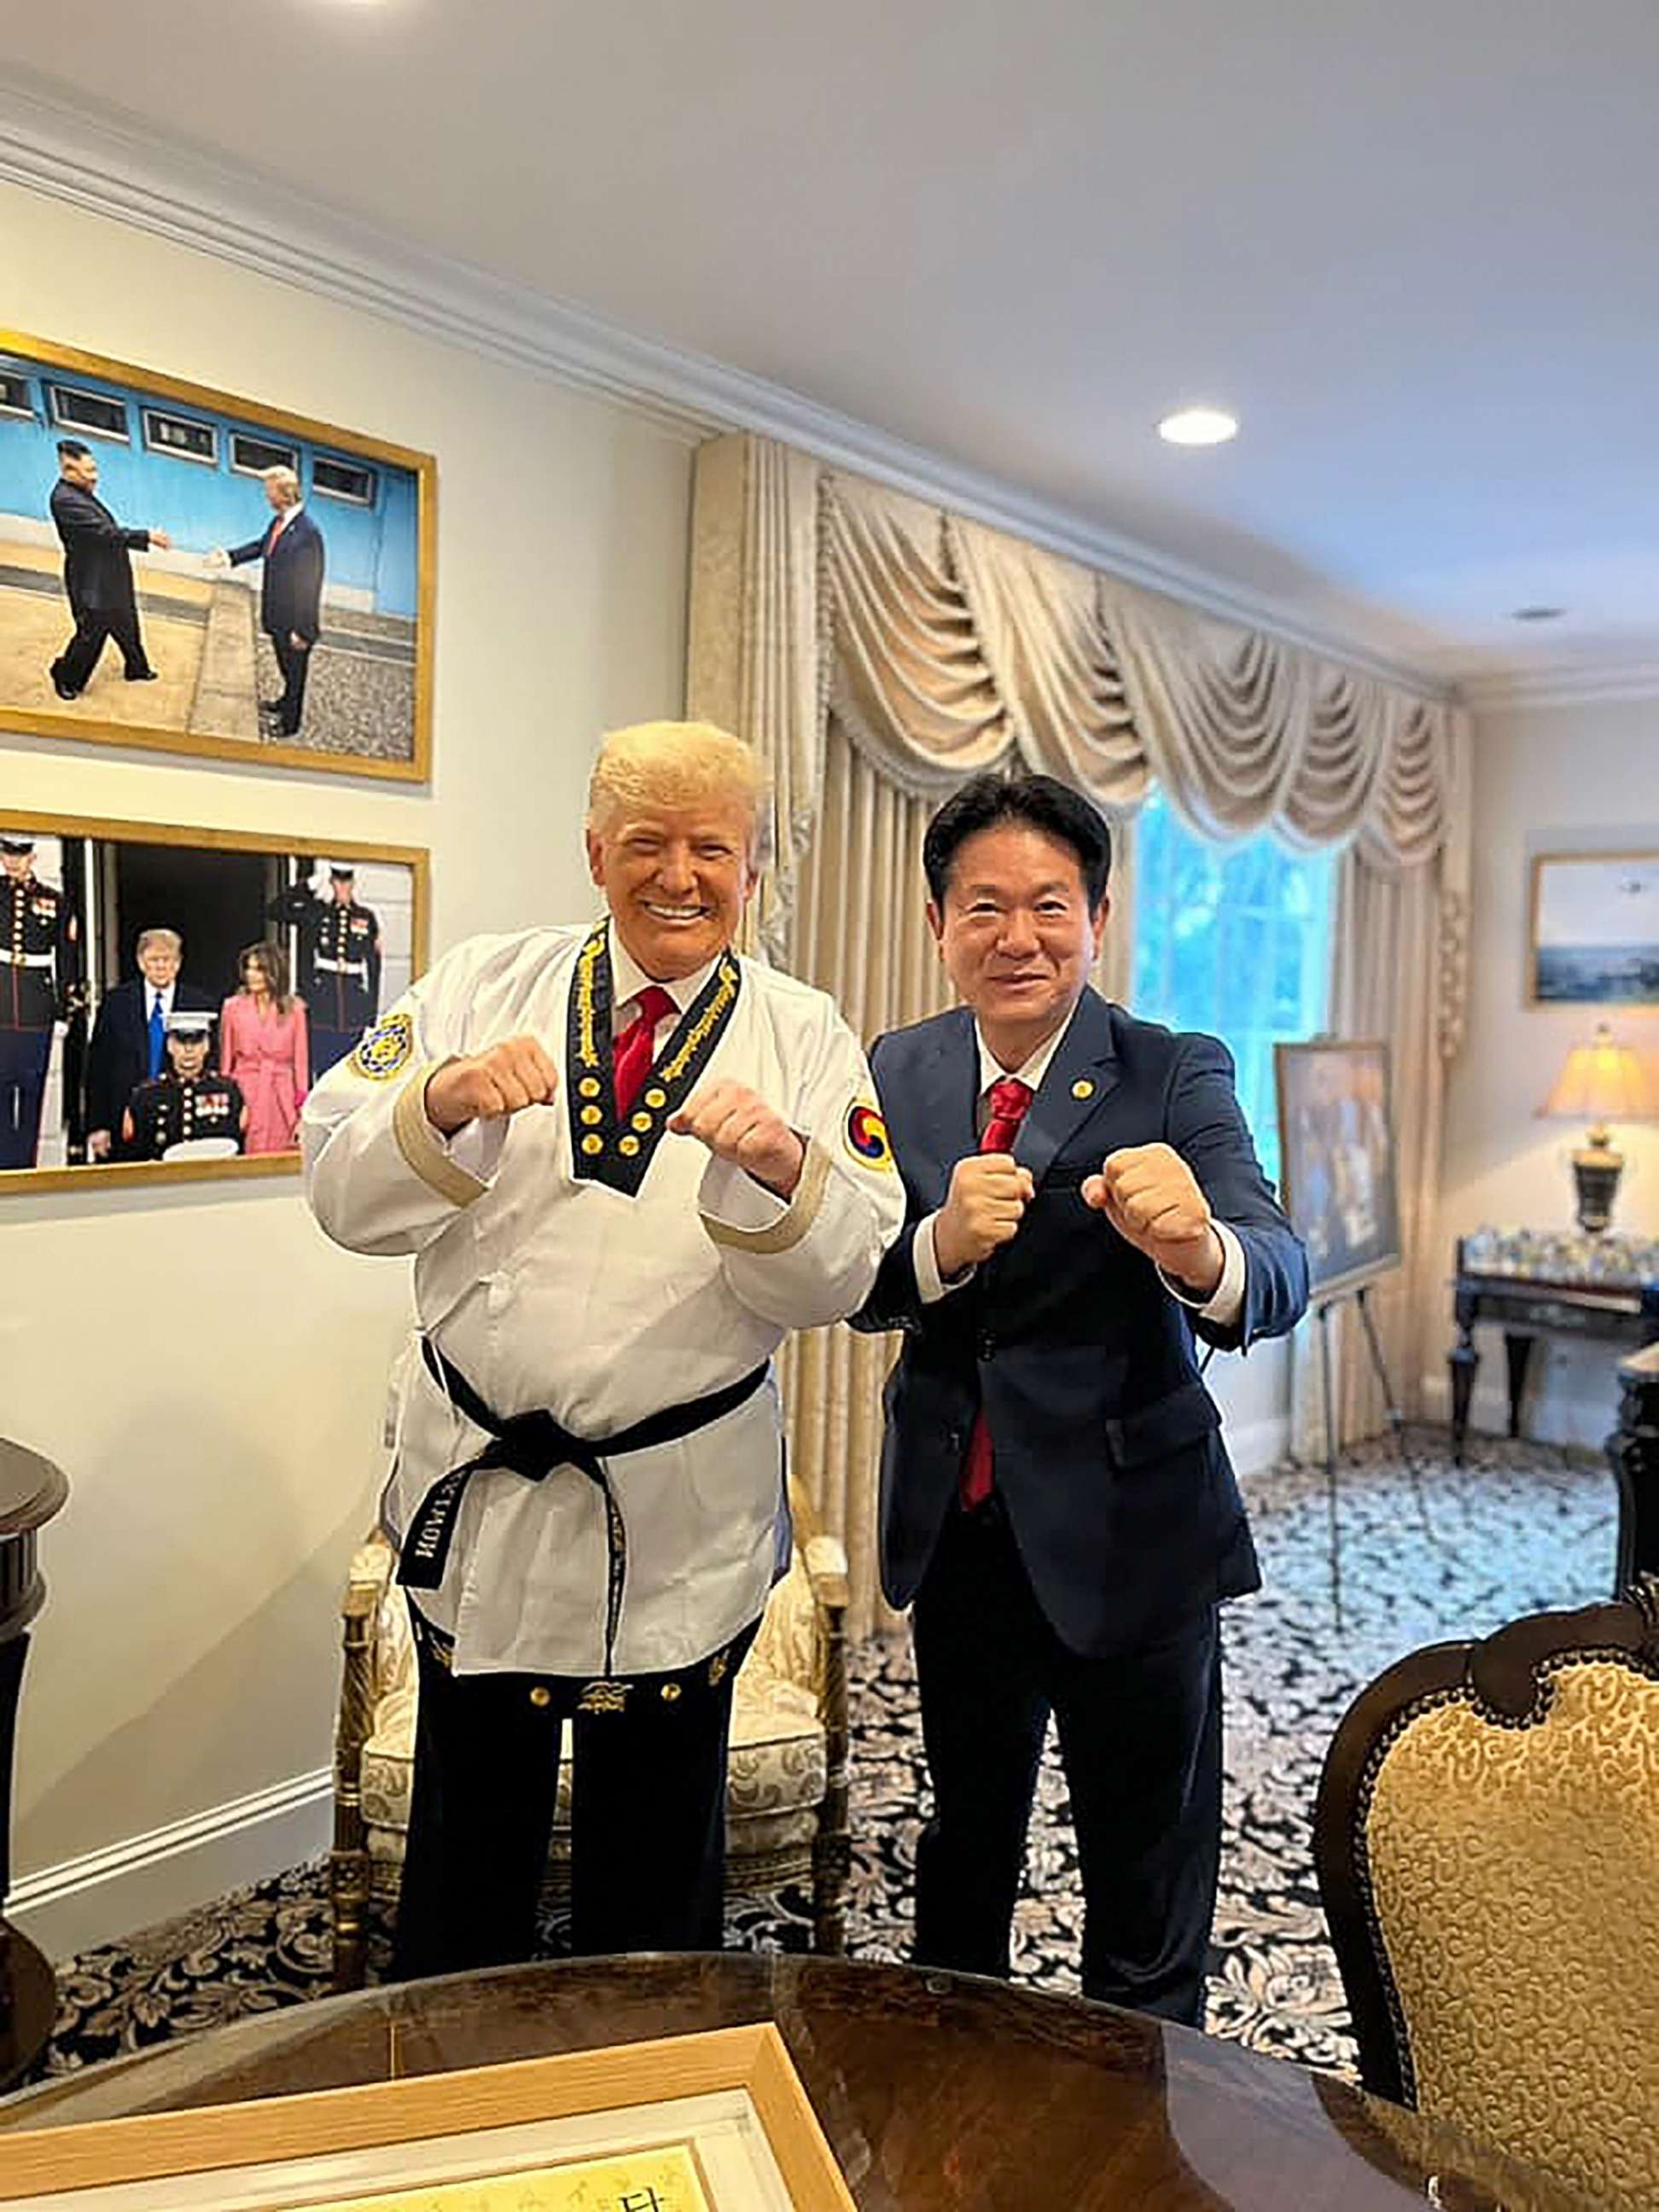 PHOTO: Kukkiwon World Taekwondo Headquarters president Lee Dong-sup with former president Donald Trump in Trump's Mar-a-Lago office, in a photo posted to the organizations Facebook page, Nov. 19, 2021.